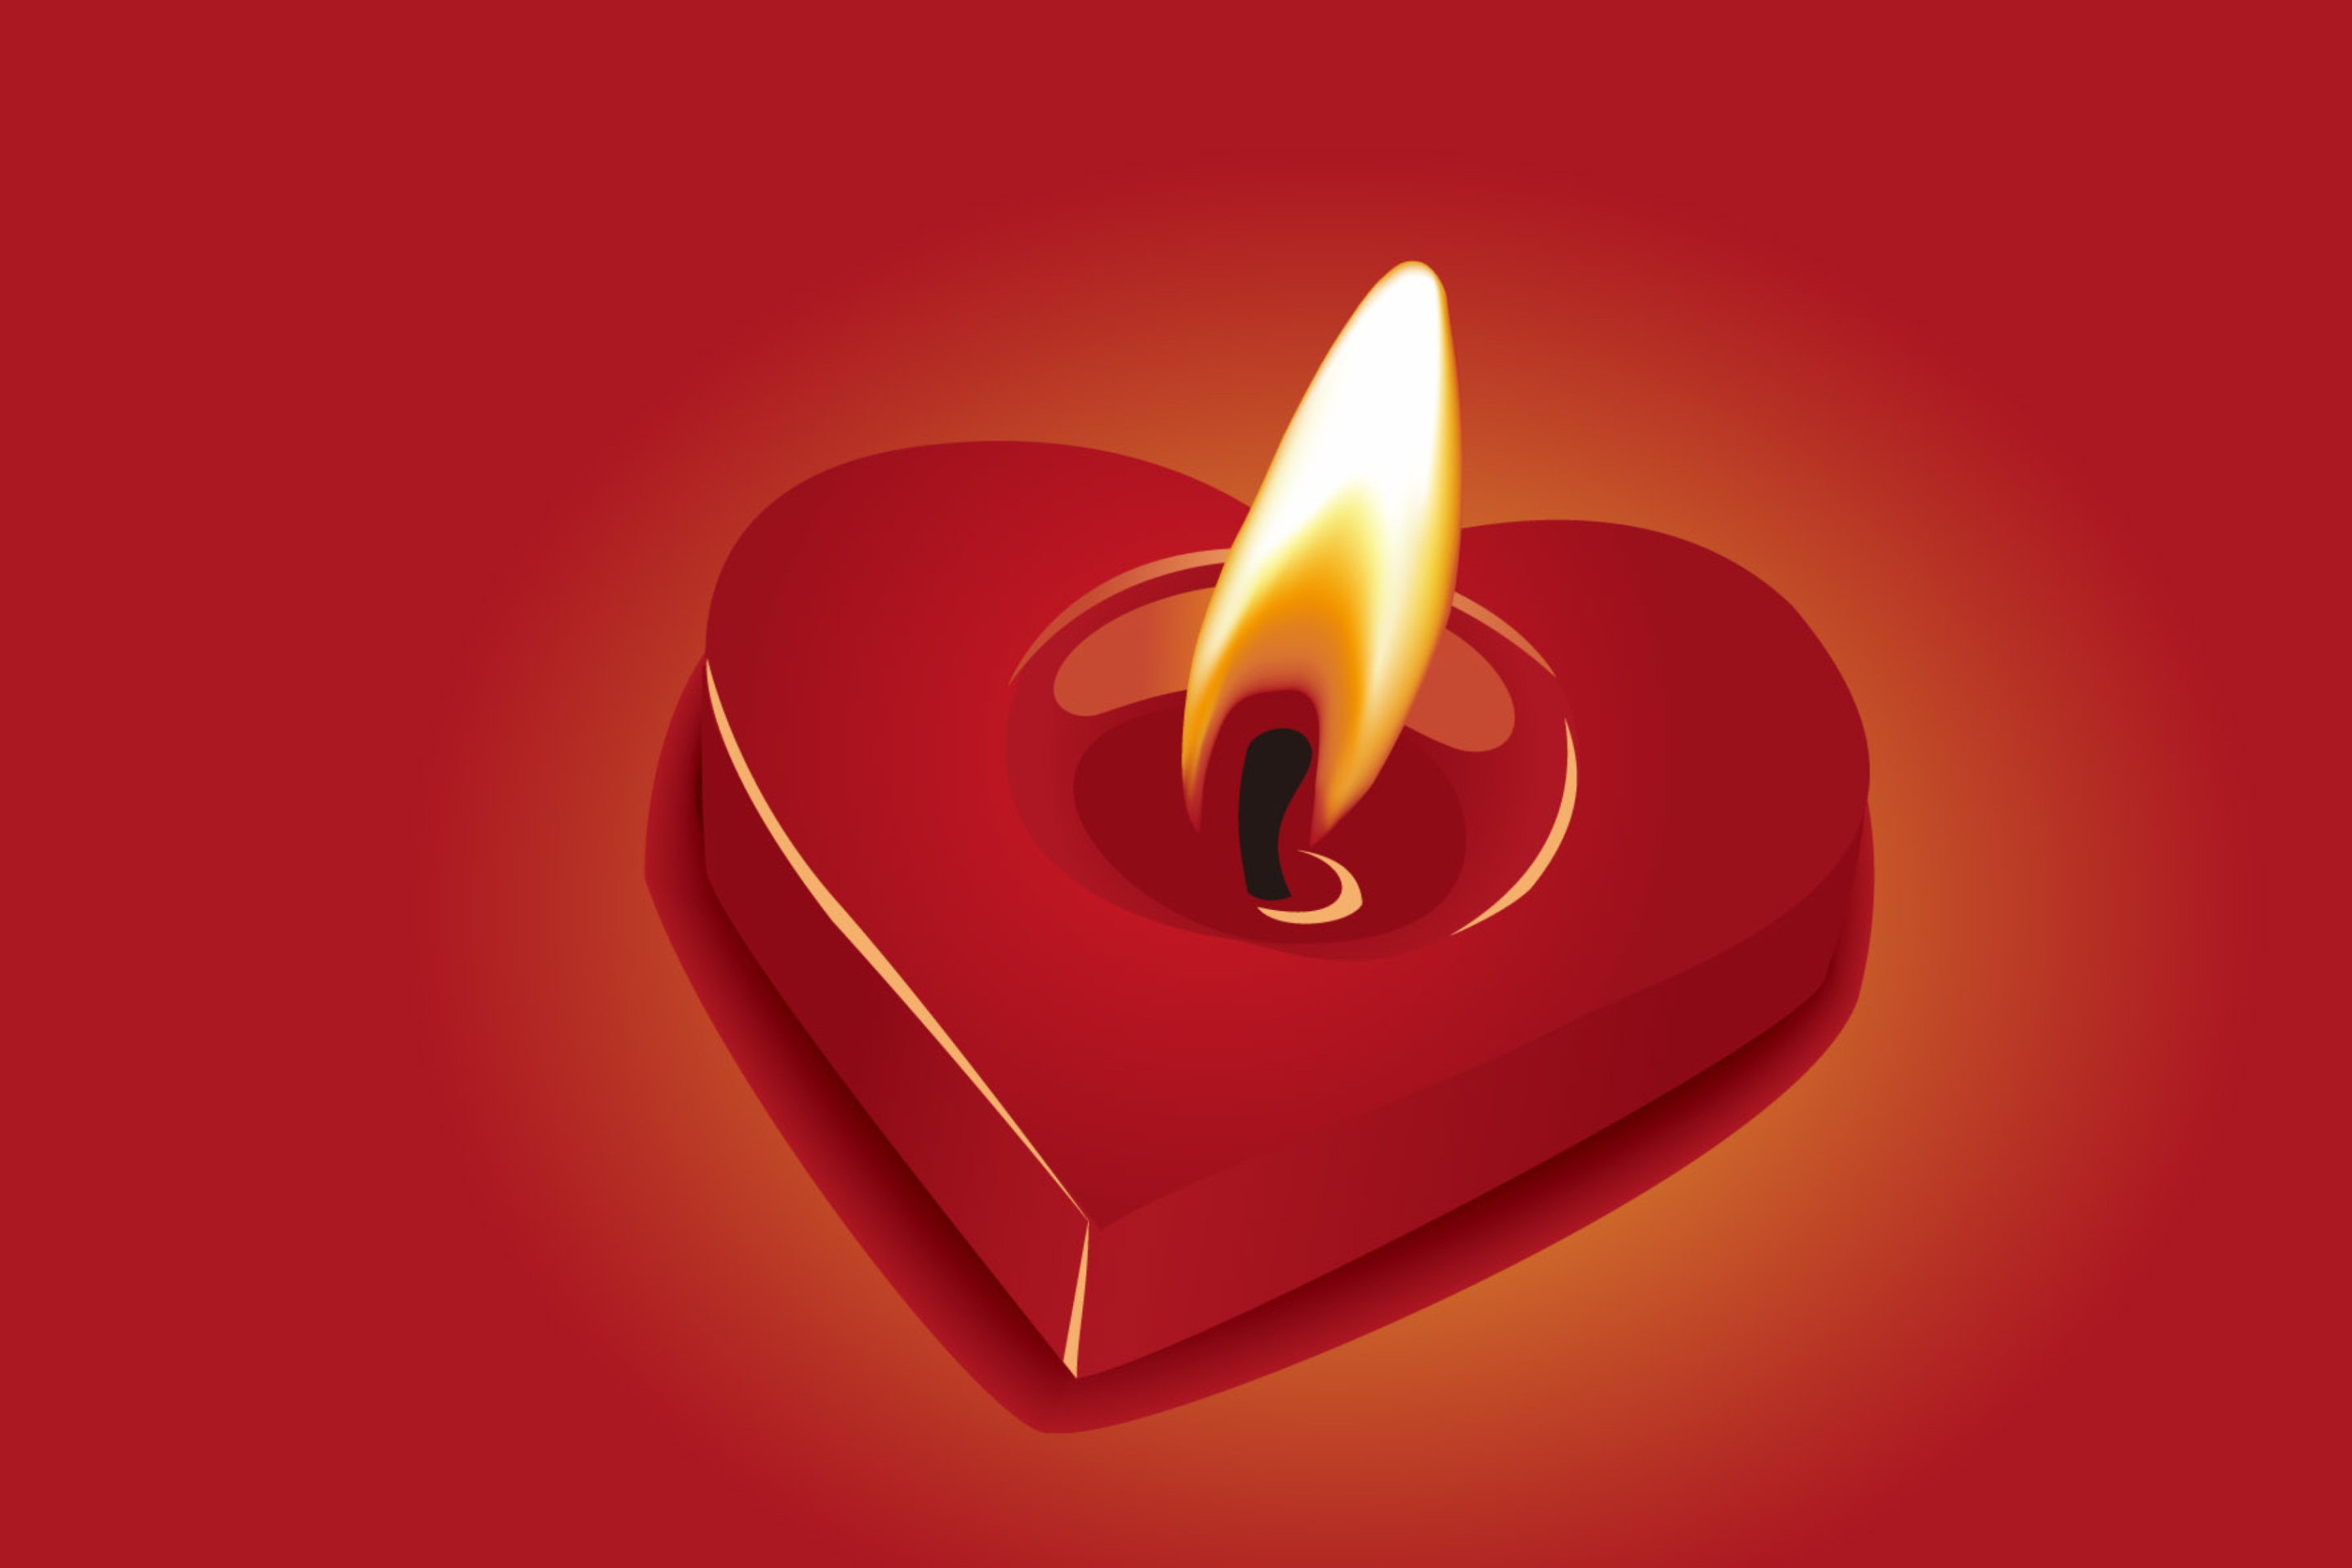 Heart Shaped Candle wallpaper 2880x1920